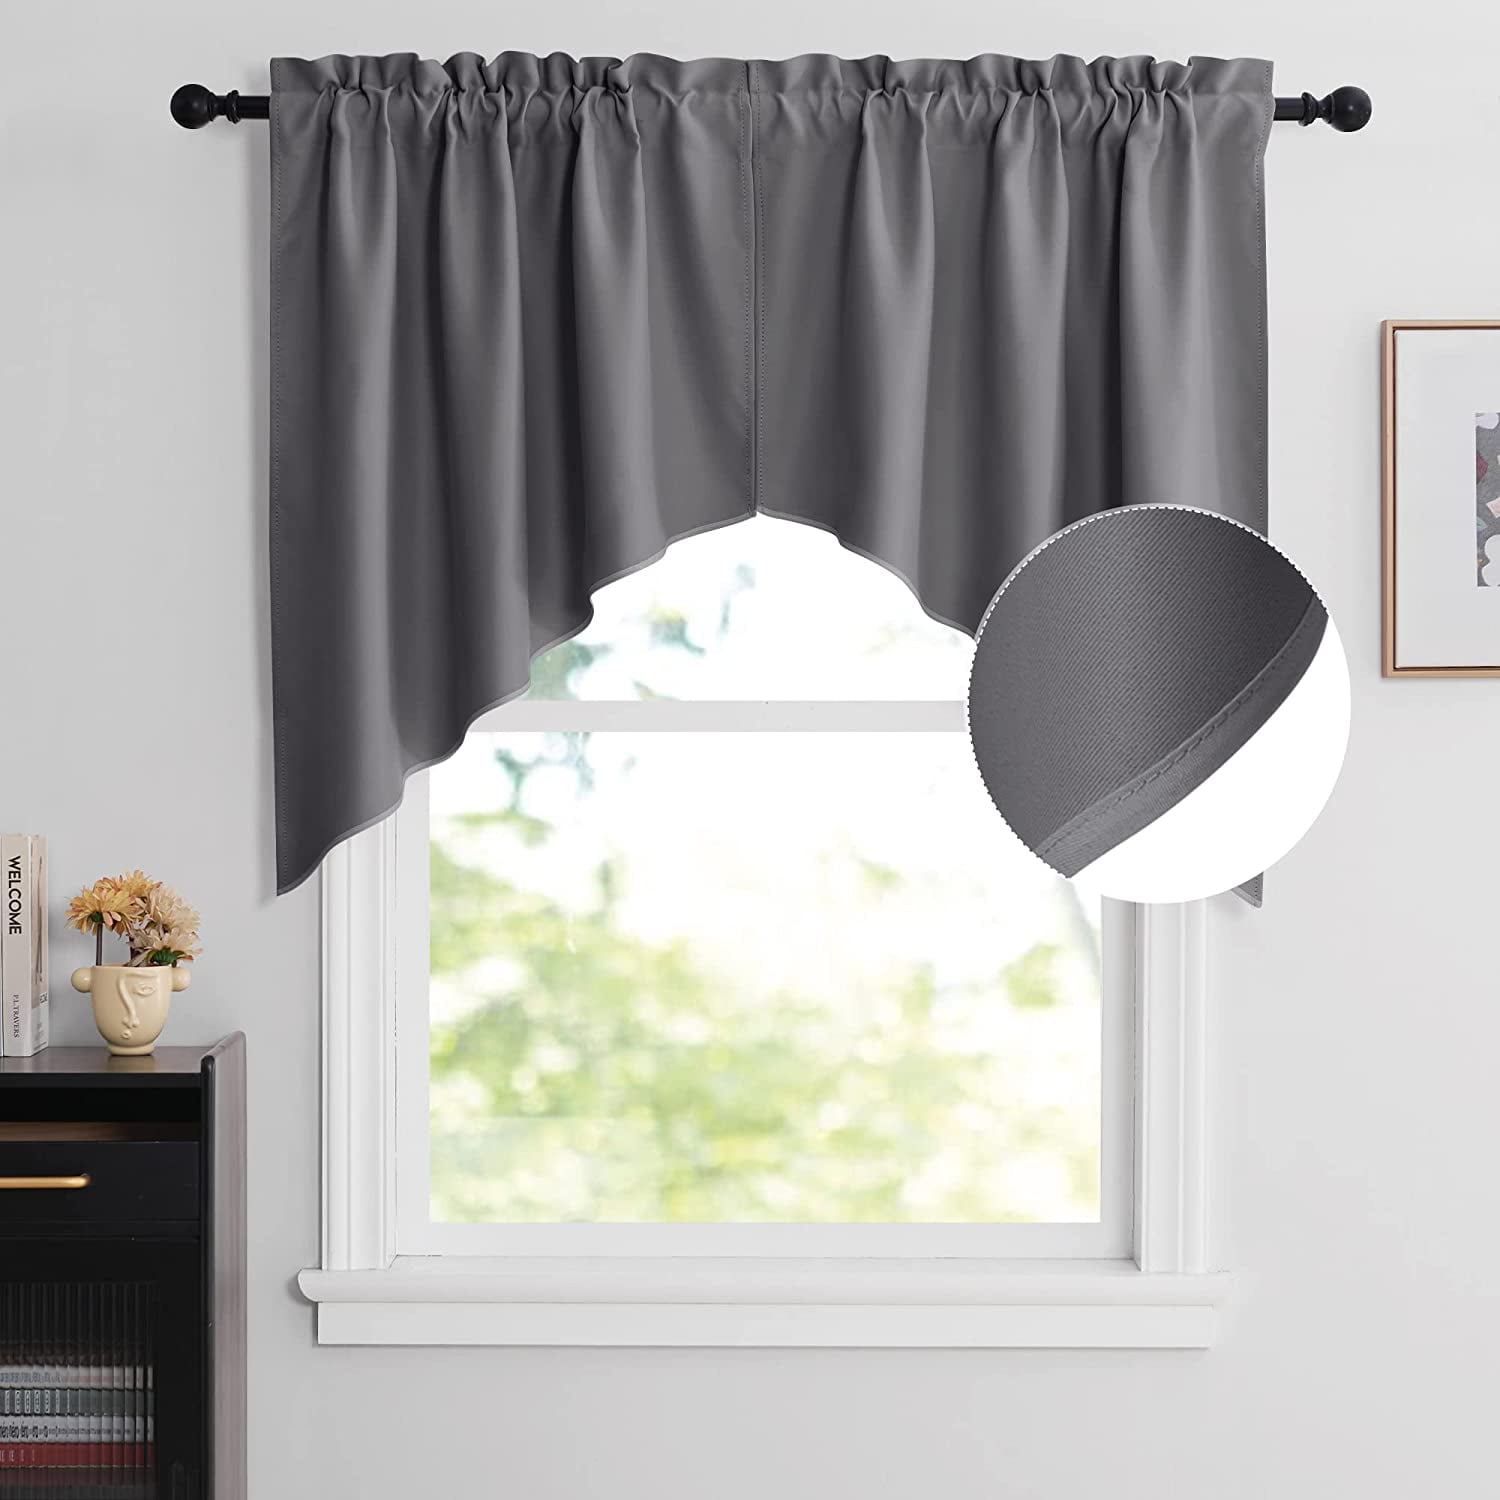 NICETOWN Scalloped Window Valances for Kitchen 4 Panels of Home Decoration Thermal Insulated 52-inch by 18-inch Rod Pocket Blackout Valance Window Treatment/Curtains/Drapes/Draperies in Grey 